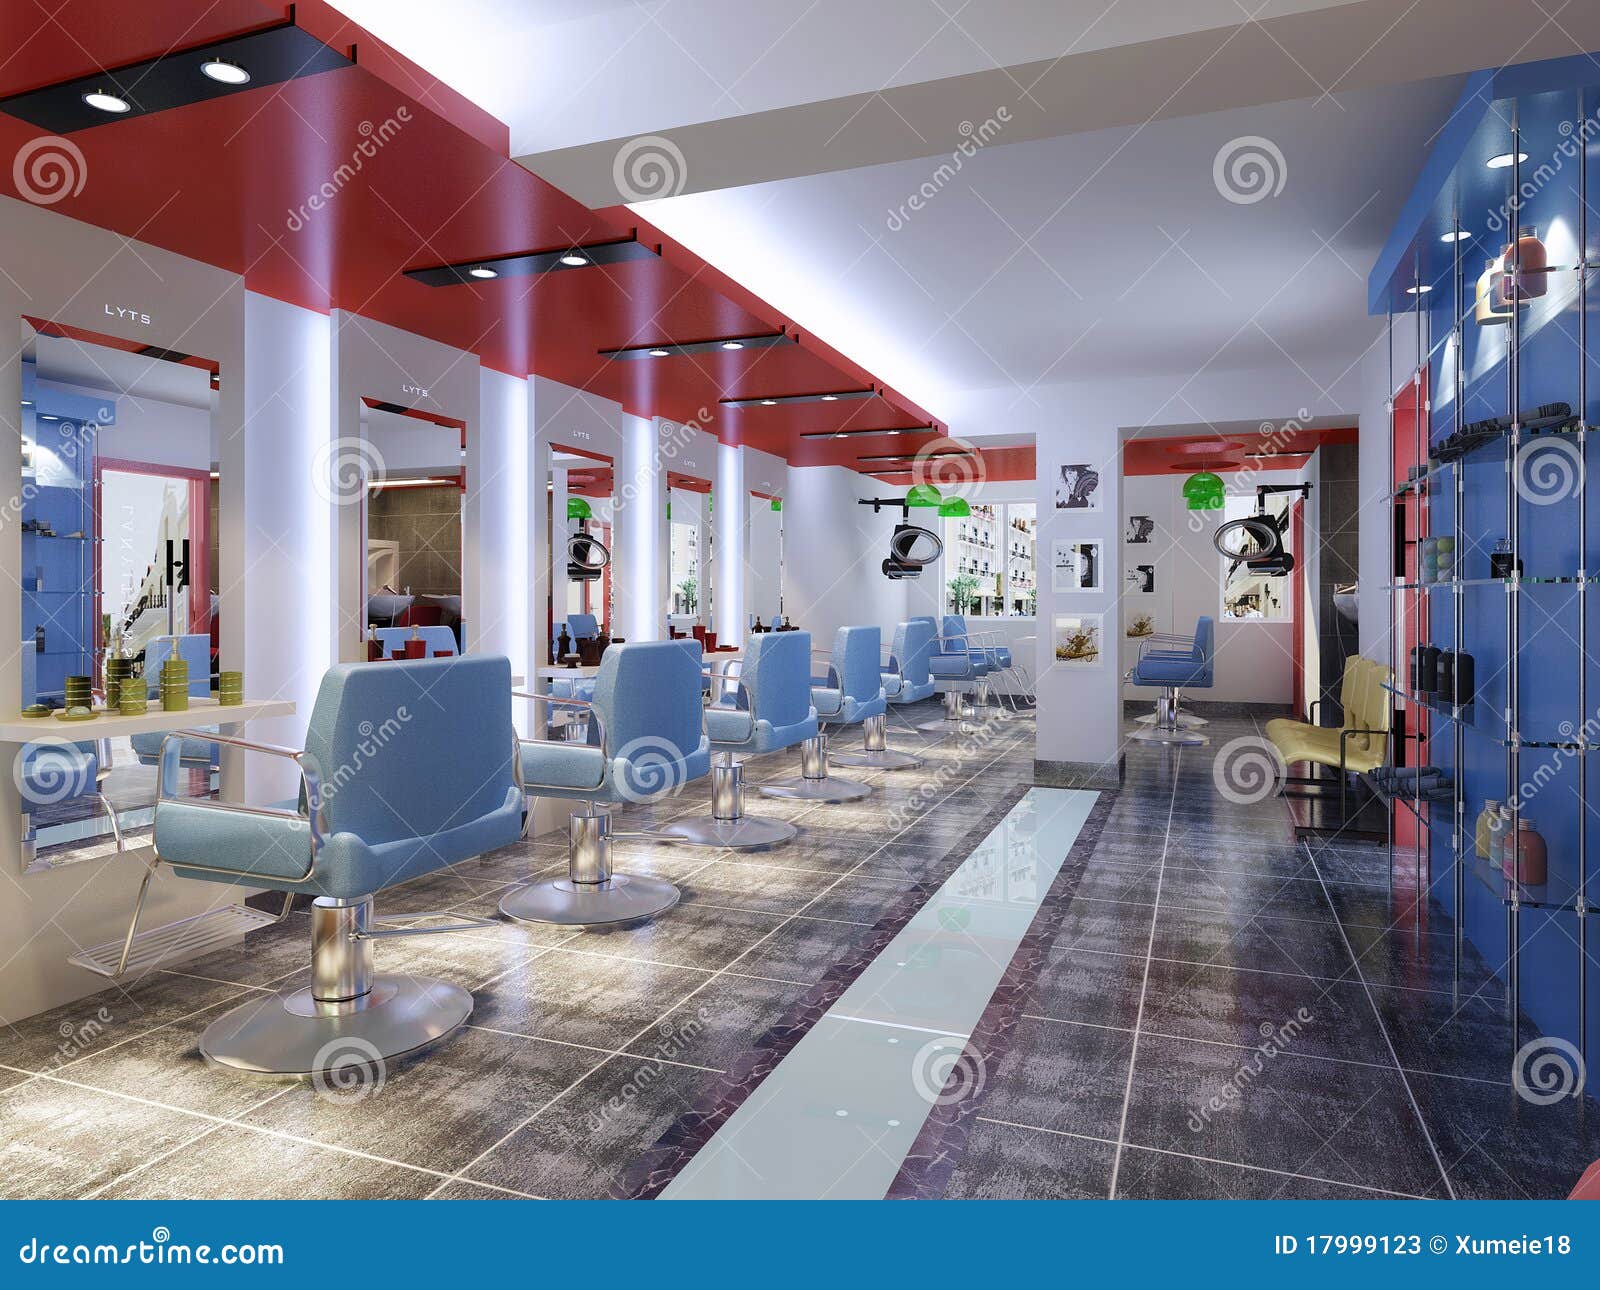 rendering barber shop image showing chairs